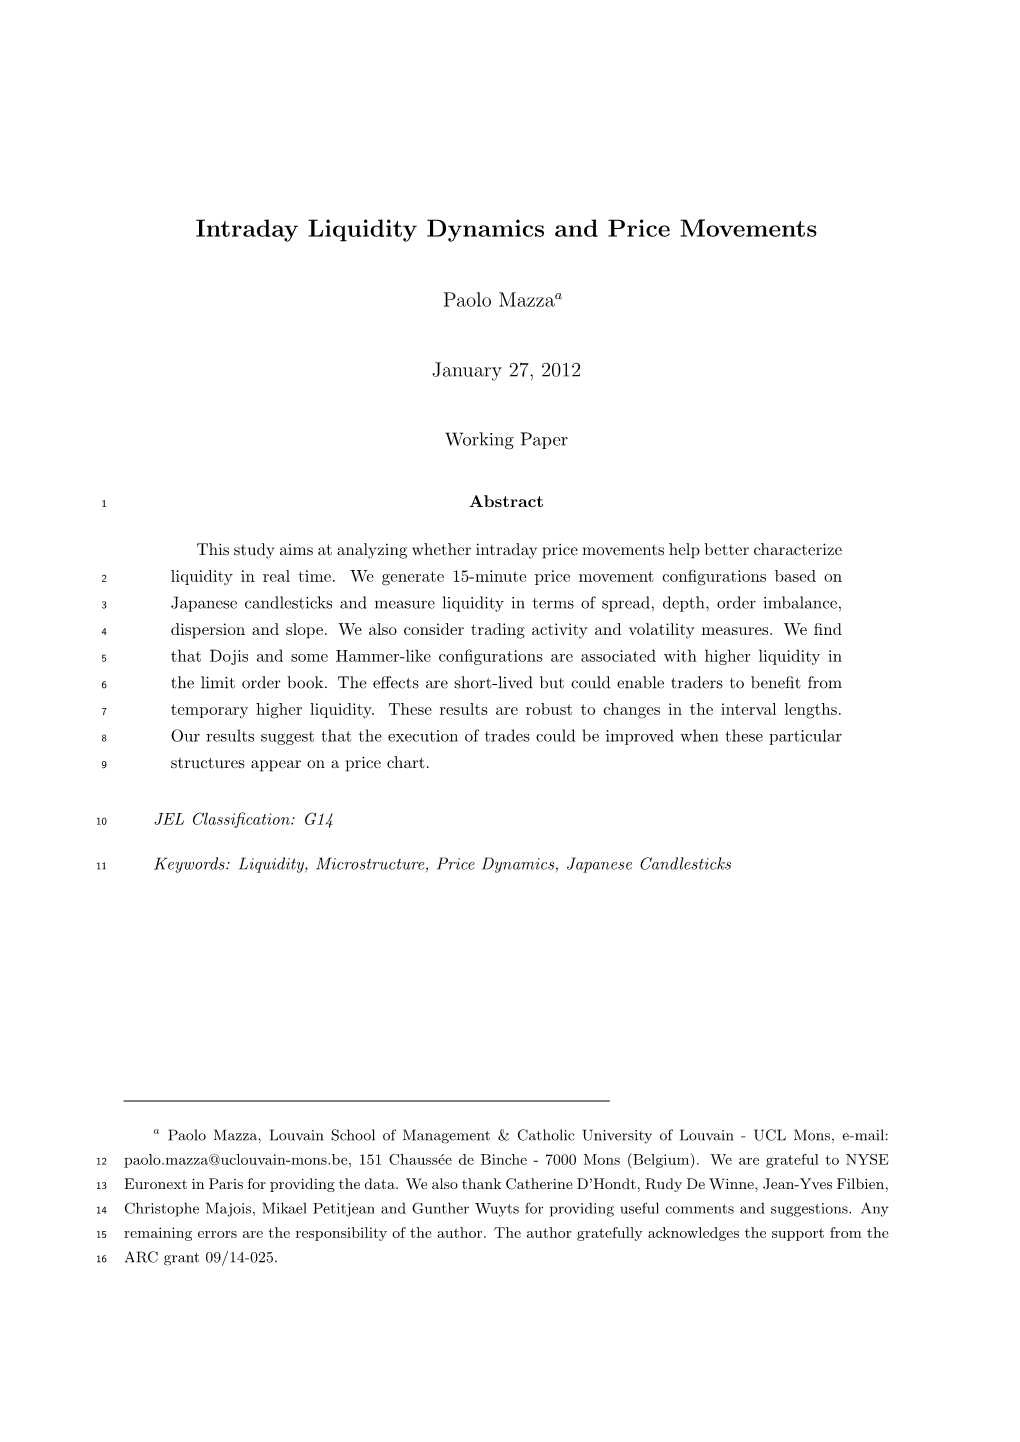 Intraday Liquidity Dynamics and Price Movements